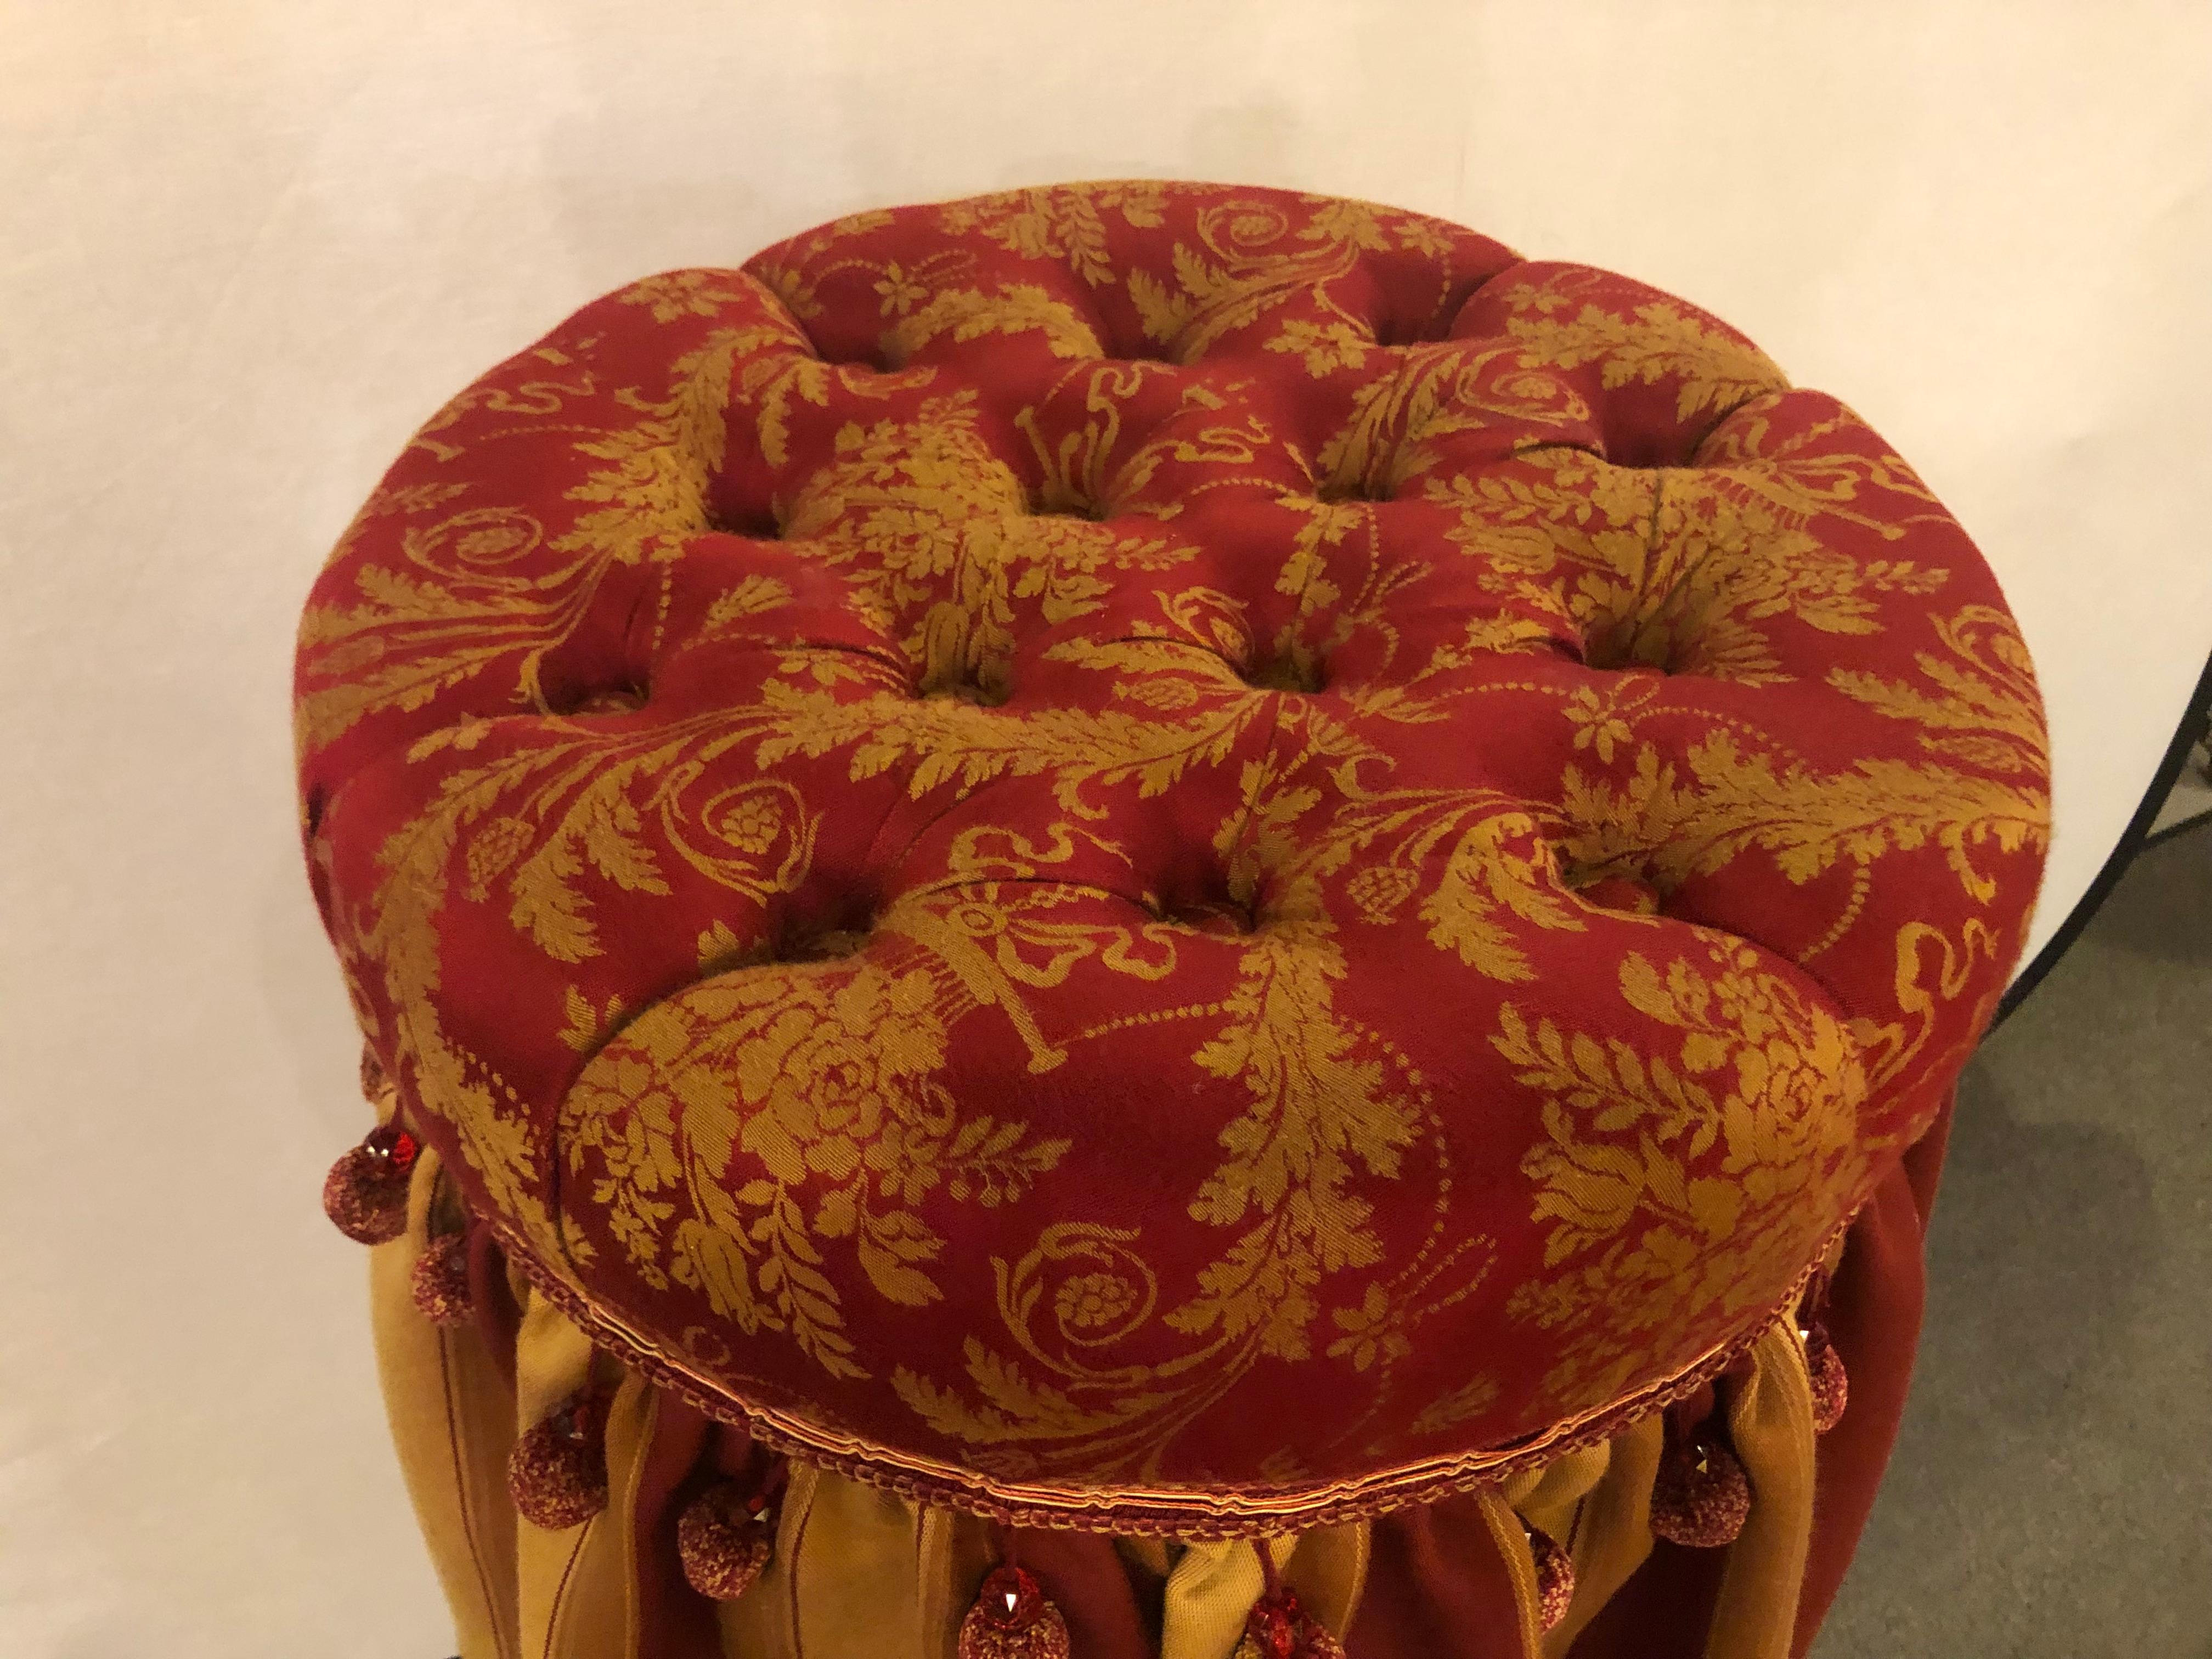 A deco upholstered tufted red and gilt decorated ottoman or footstool. This spectacular footstool or ottoman pouf is simply breathtaking. The finely upholstered piece with a tufted top and decorative base with stripped design and tassel form.